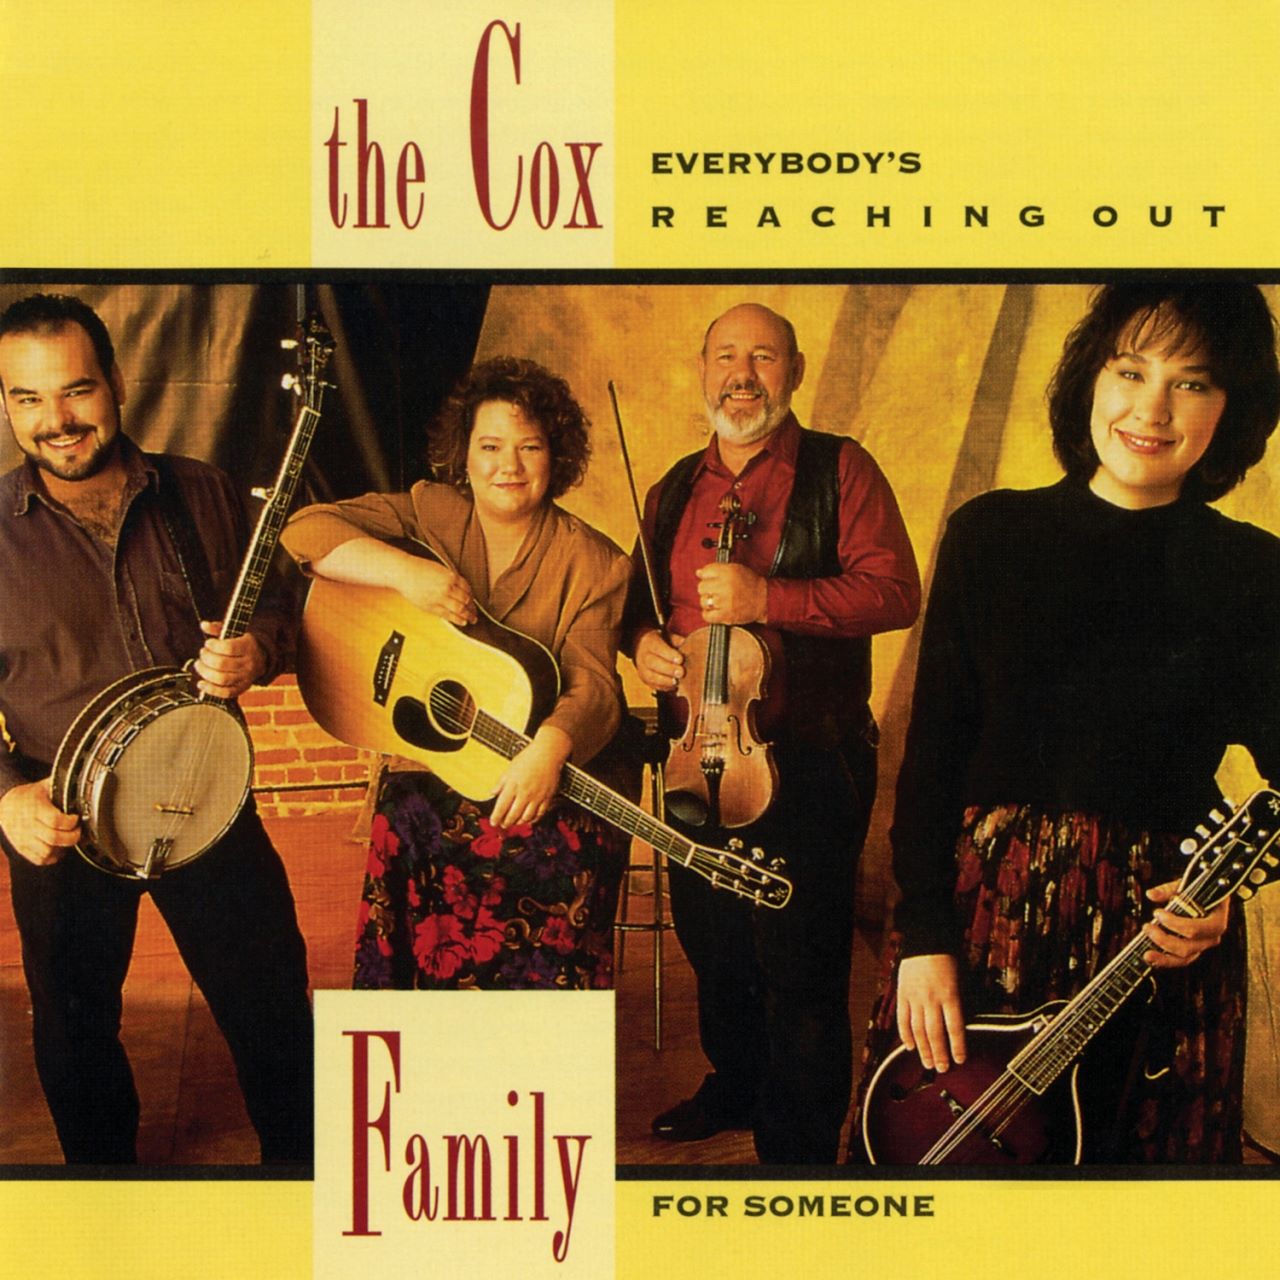 Cox Family - Everybody's Reaching Out For Someone cover album